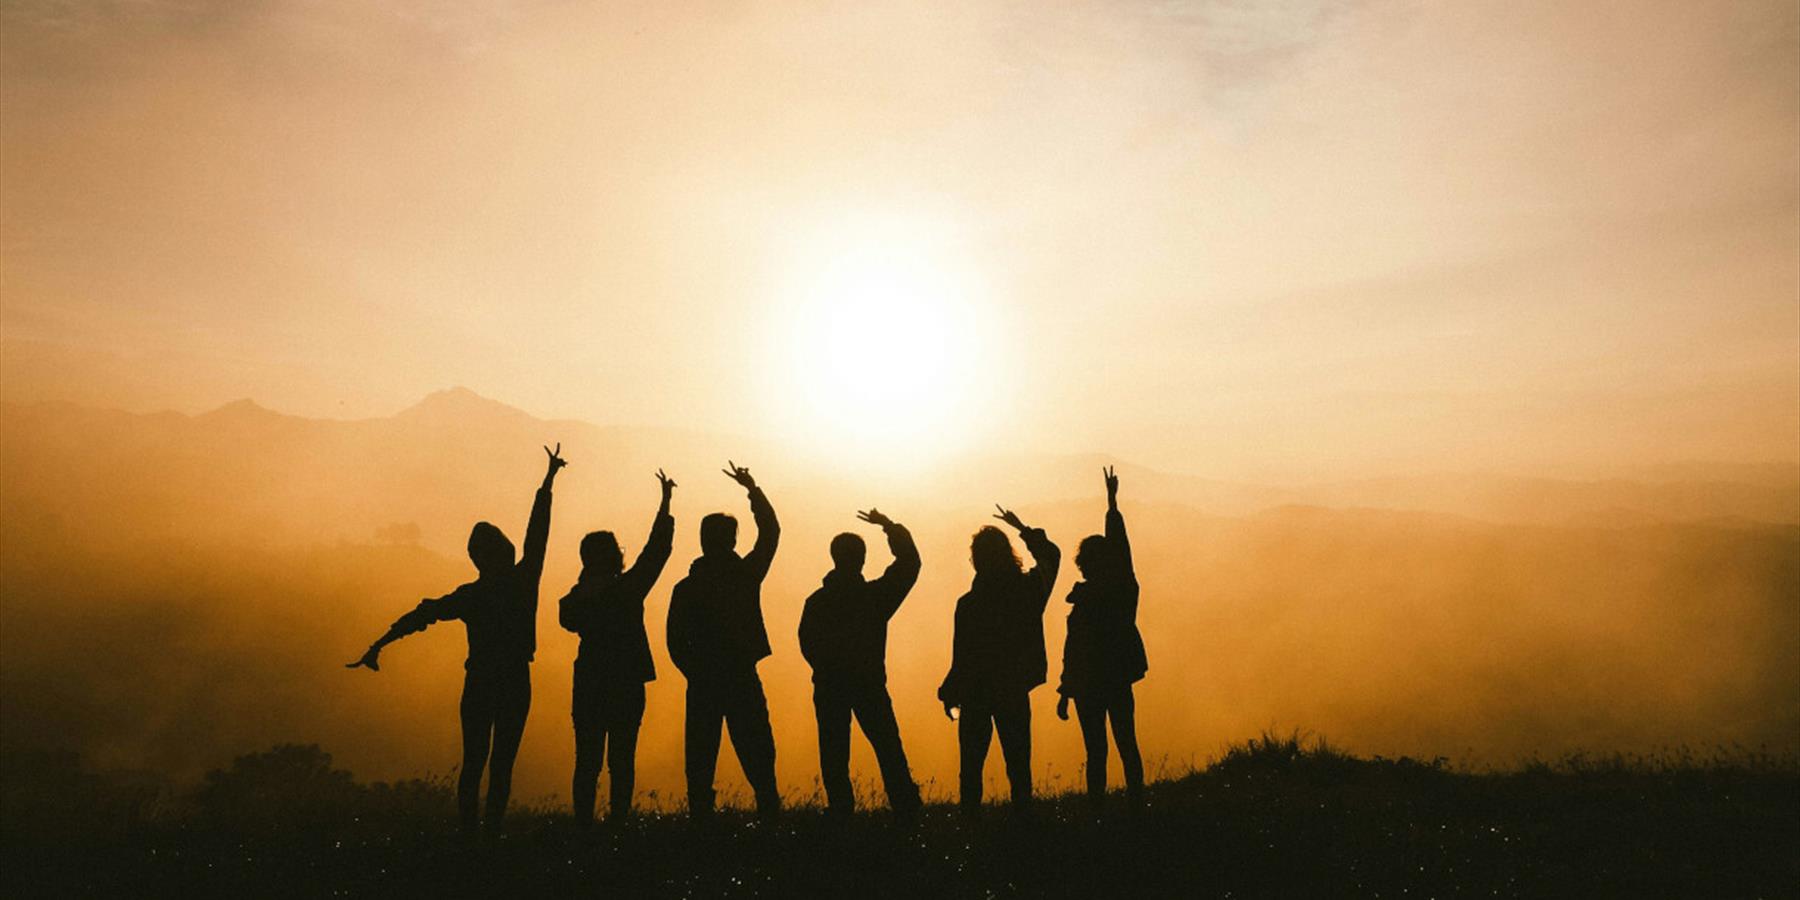 Silhouette of six people posing against a sunset